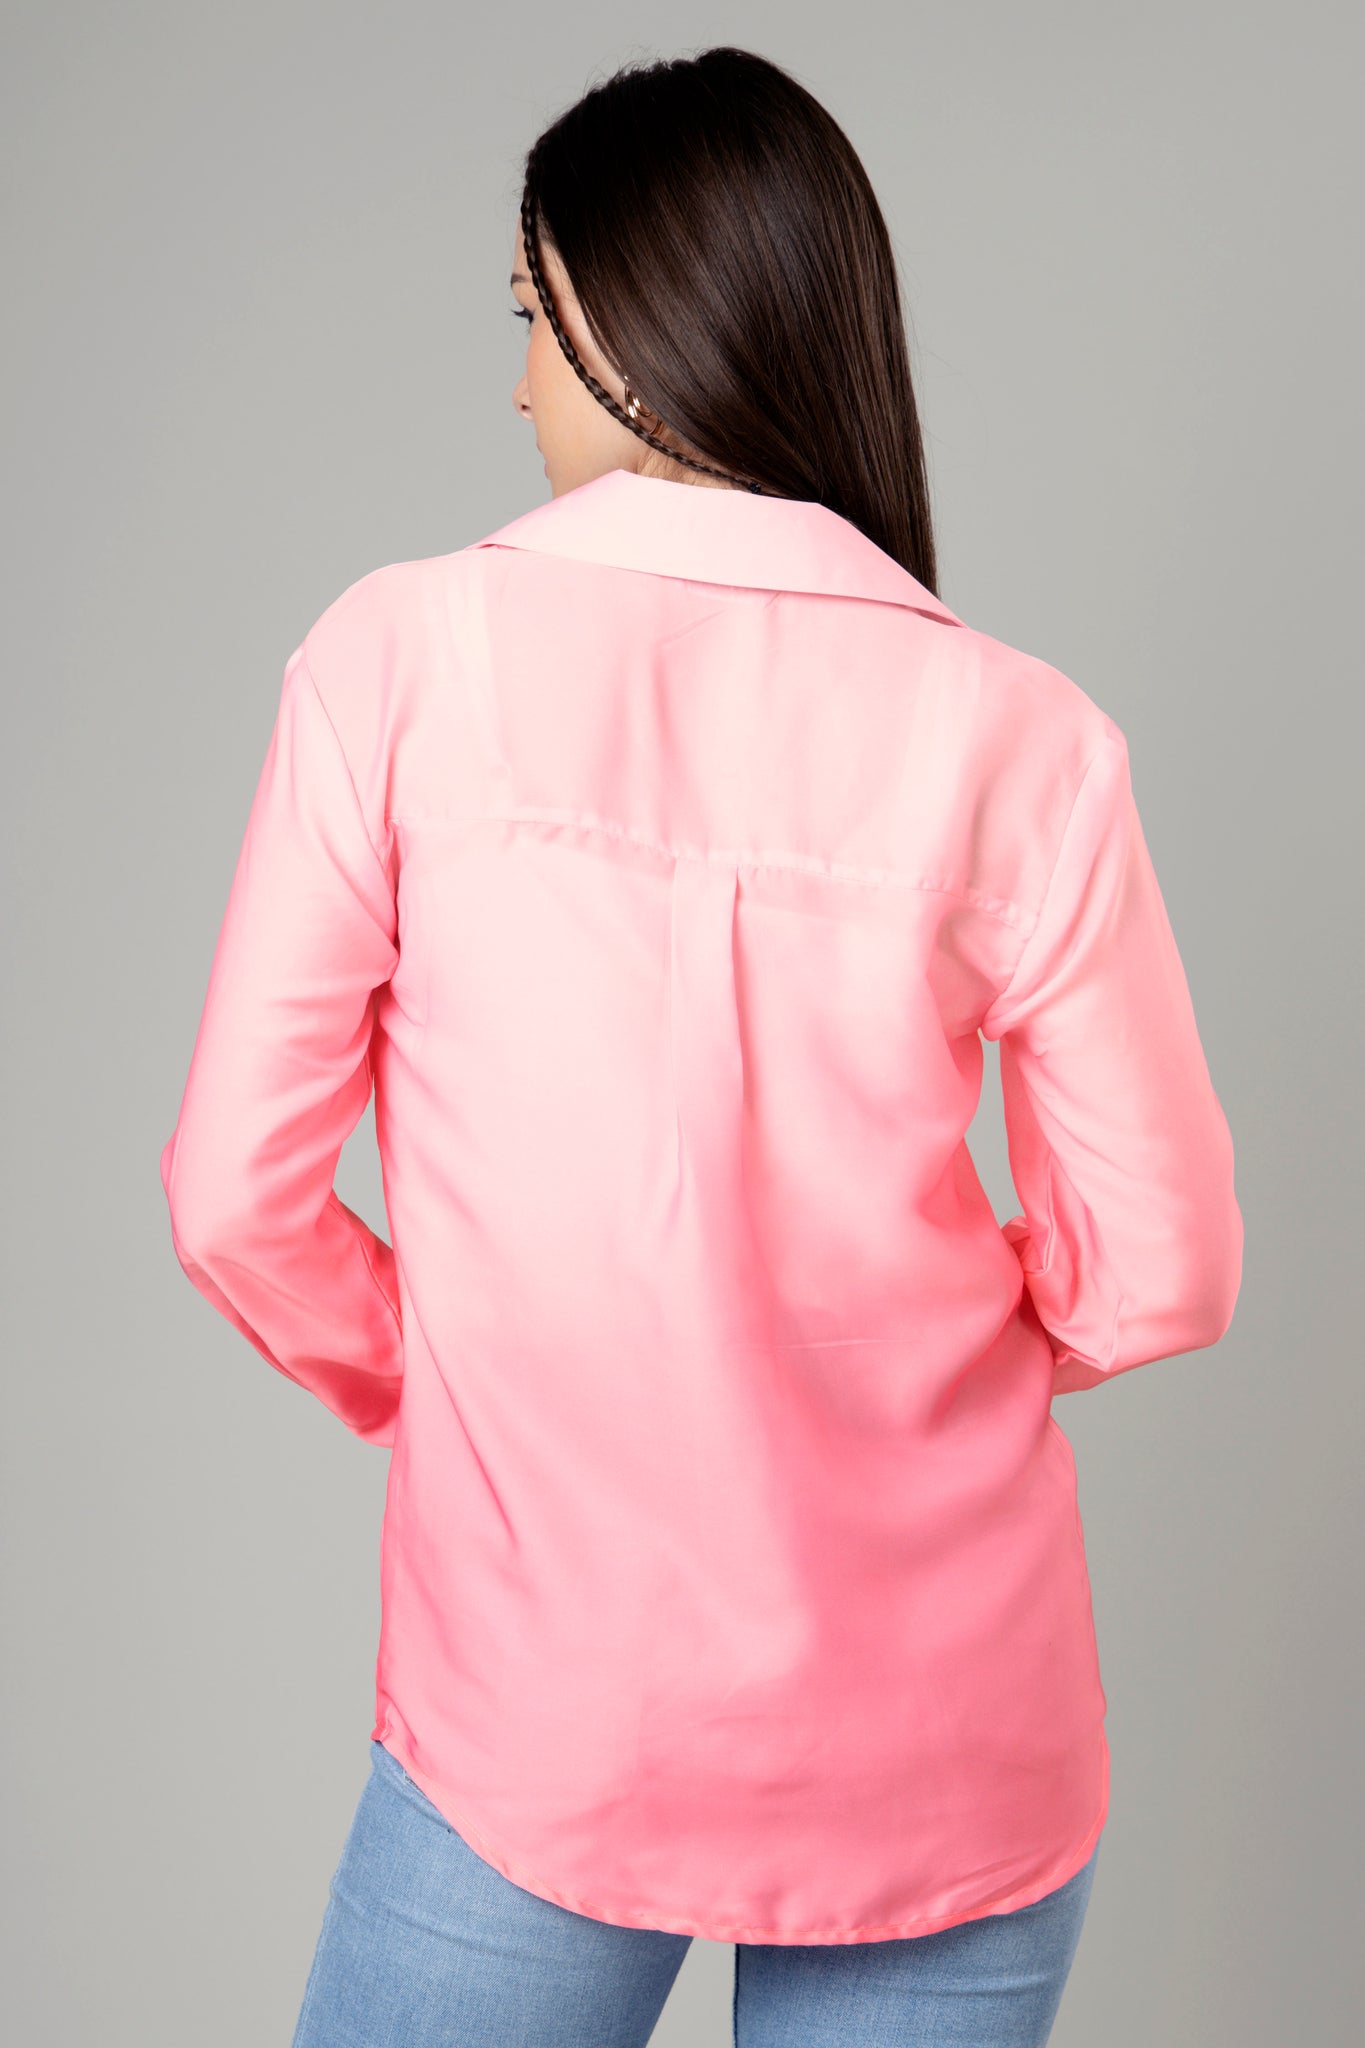 Trendy Pink Ombre Shirt For Women